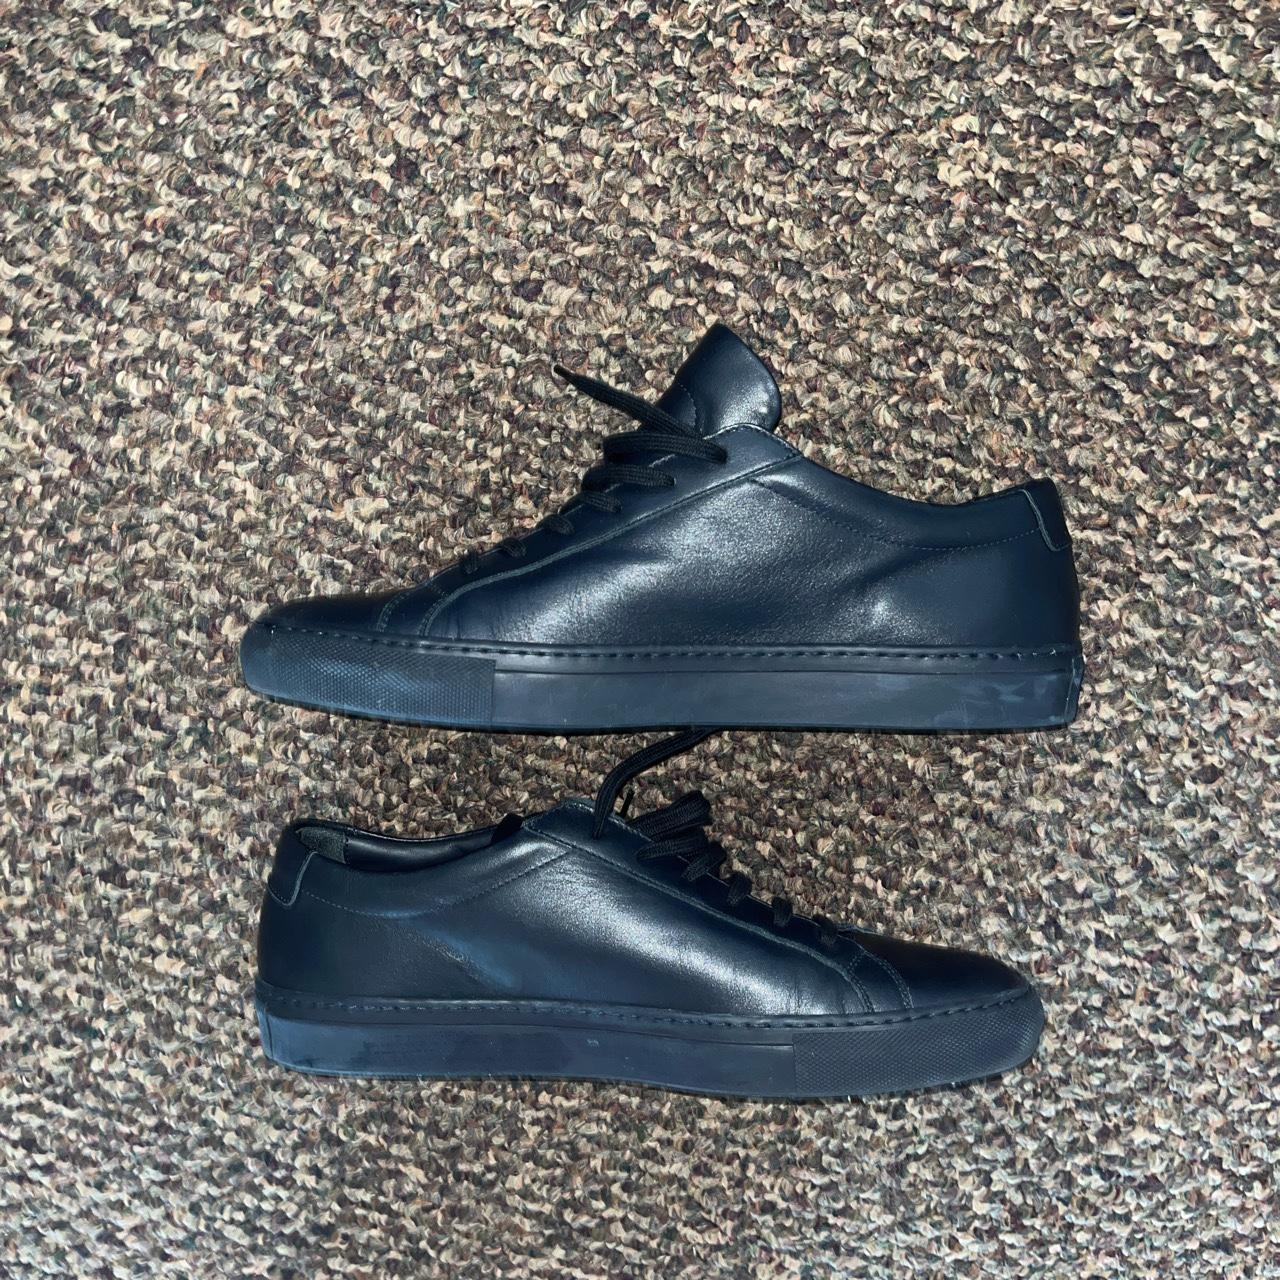 Product Image 2 - Common Projects Achilles Low Navy
#commonprojects